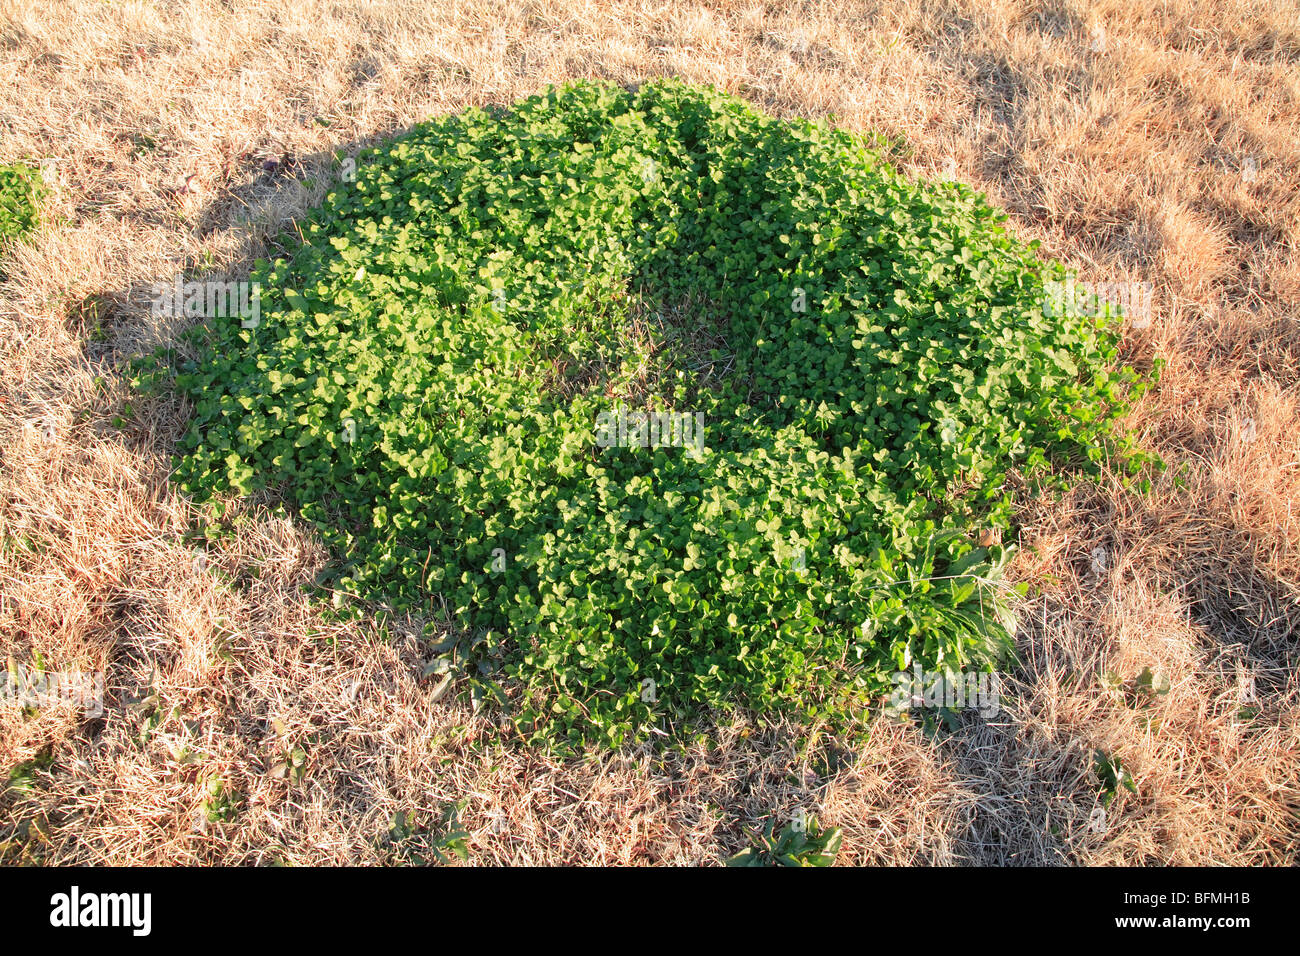 Clover leaves growing in circle, Tokyo prefecture, Japan Stock Photo